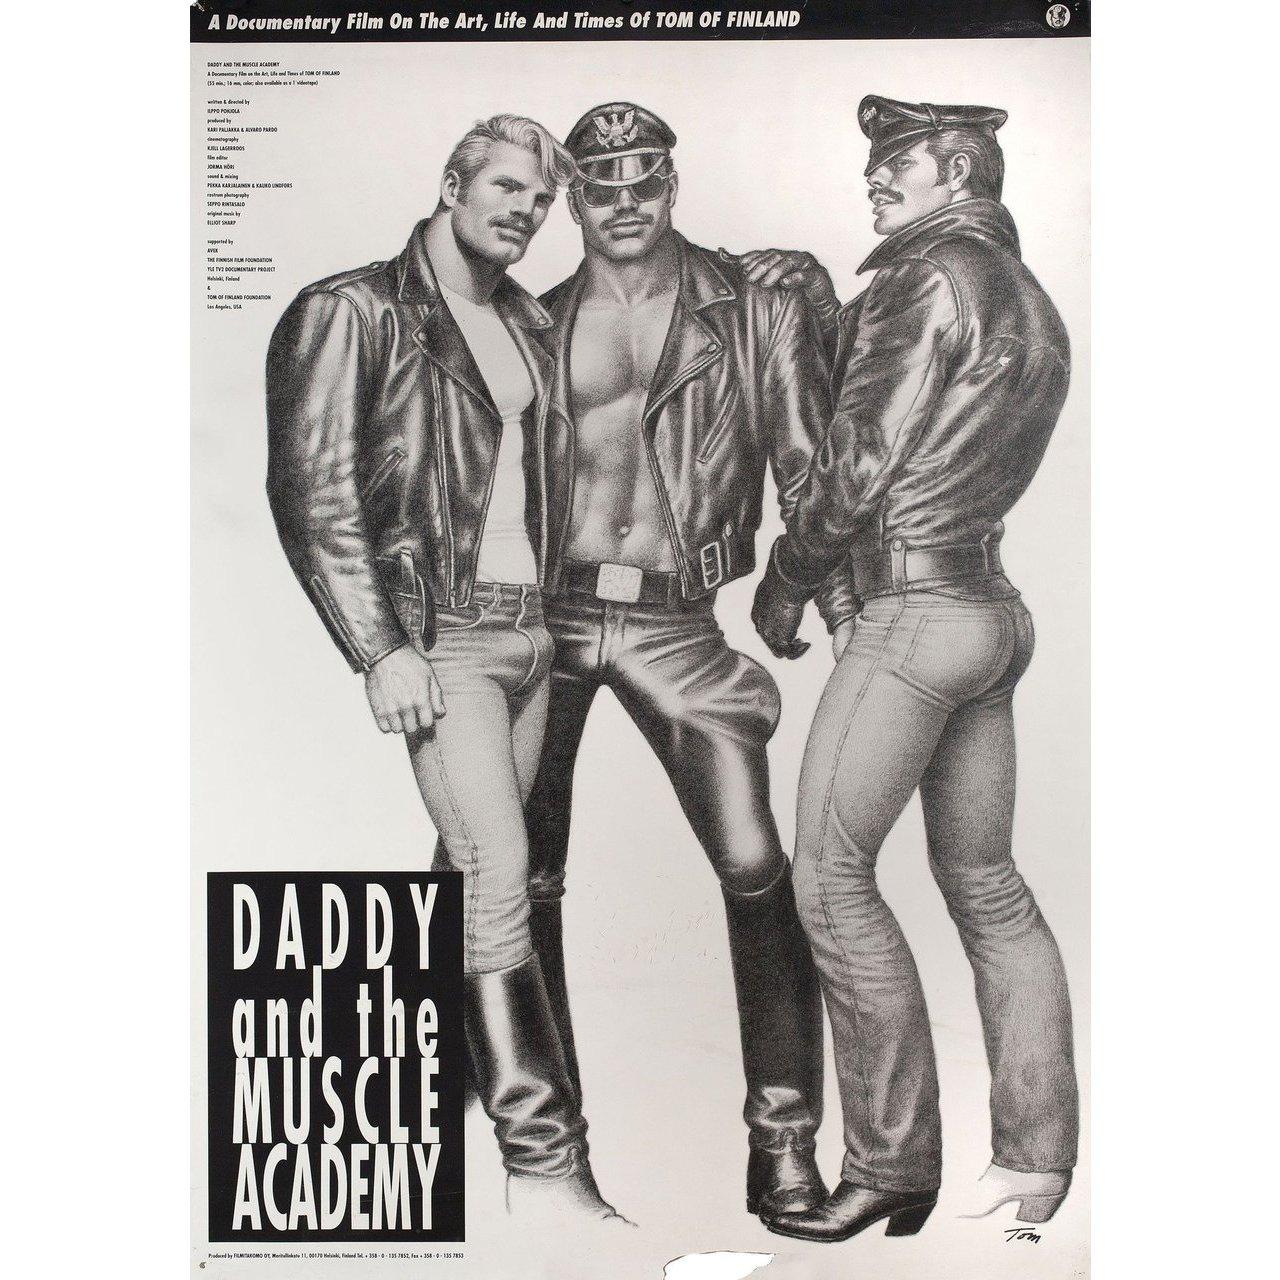 Original 1992 U.S. one sheet poster by Tom of Finland for. Very good fine condition, rolled with piece missing at bottom and tape on the back. Please note: the size is stated in inches and the actual size can vary by an inch or more.
 